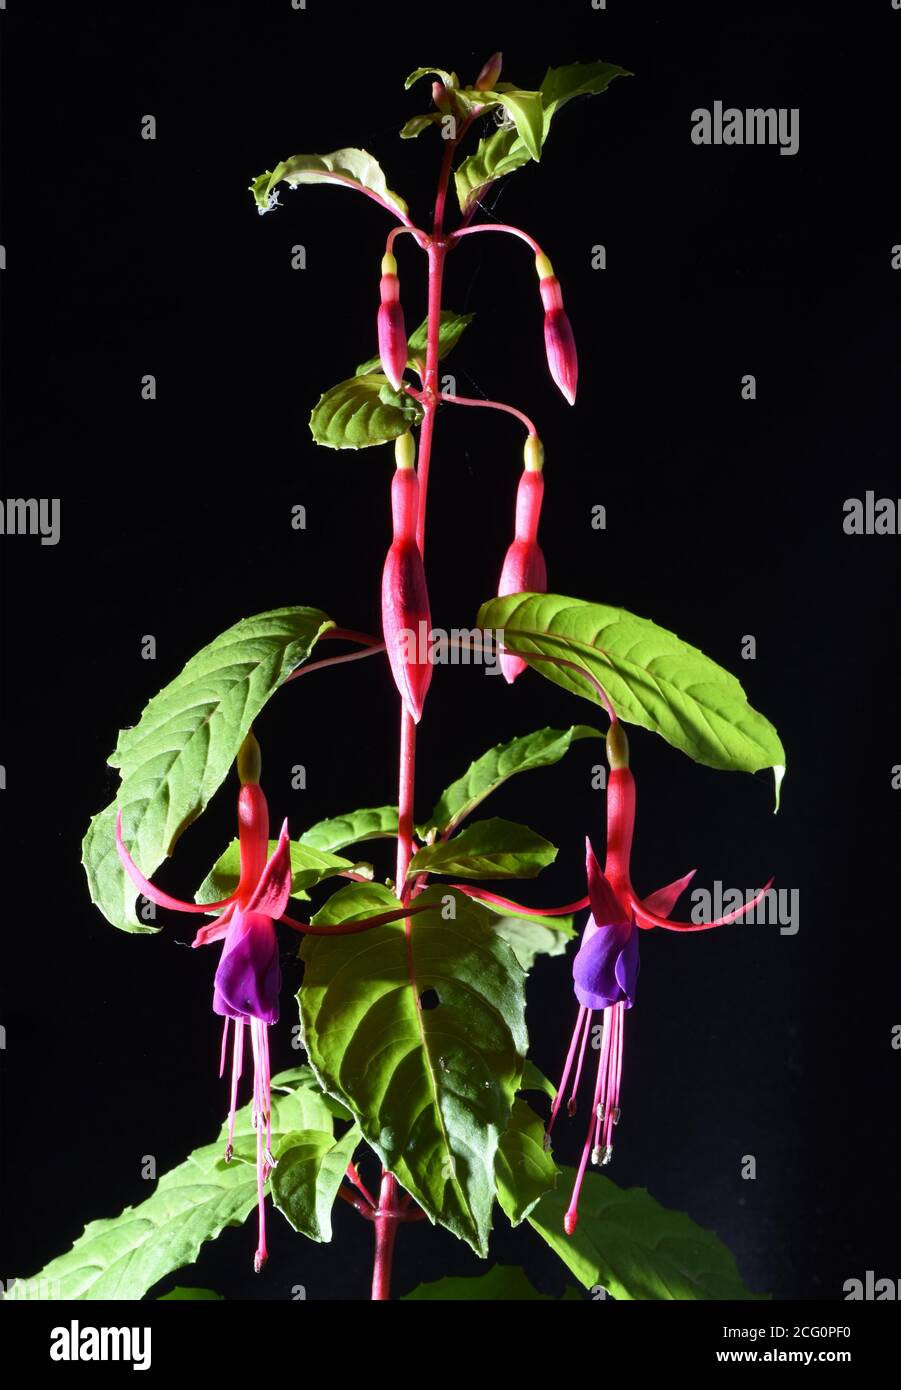 Still life of  a fuschia plant (Fuchsia magellanica) with flowers and leaves against a black background Stock Photo